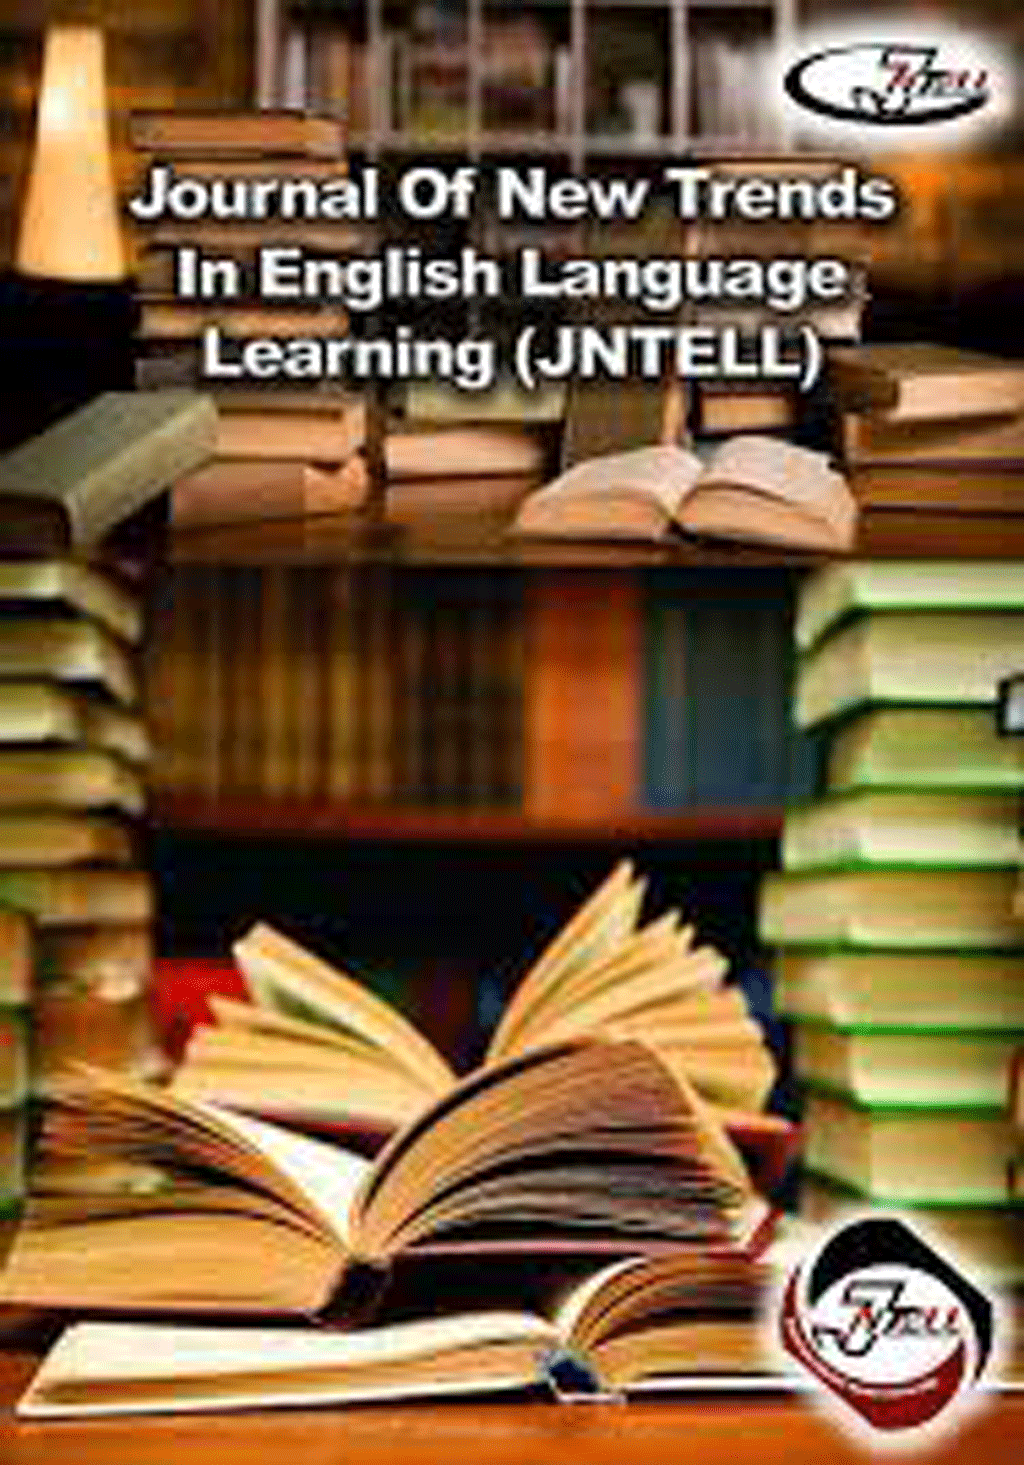 Journal of New Trends in English Language Learning - Winter 2022, Volume 1 - Number 2